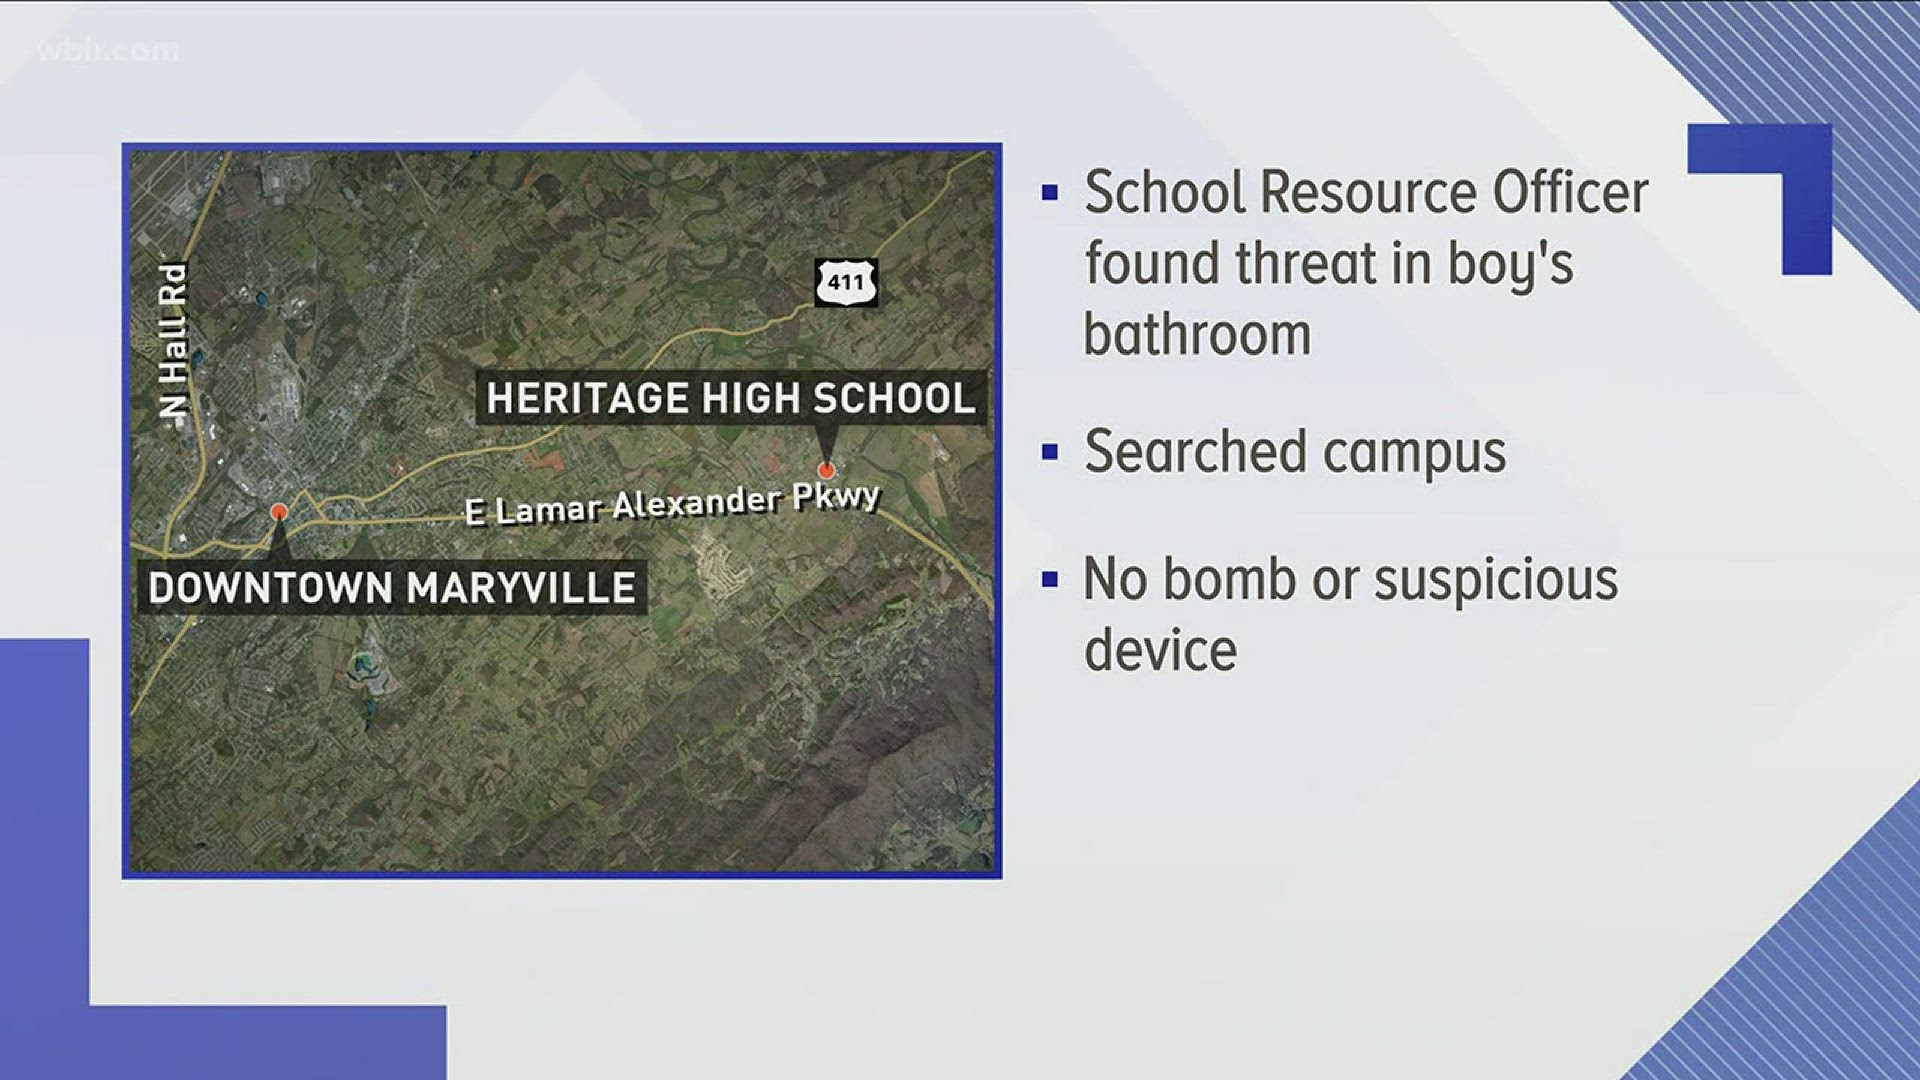 Feb. 20, 2018: The Blount County Sheriff's Office is investigating a bomb threat found at Heritage High School.